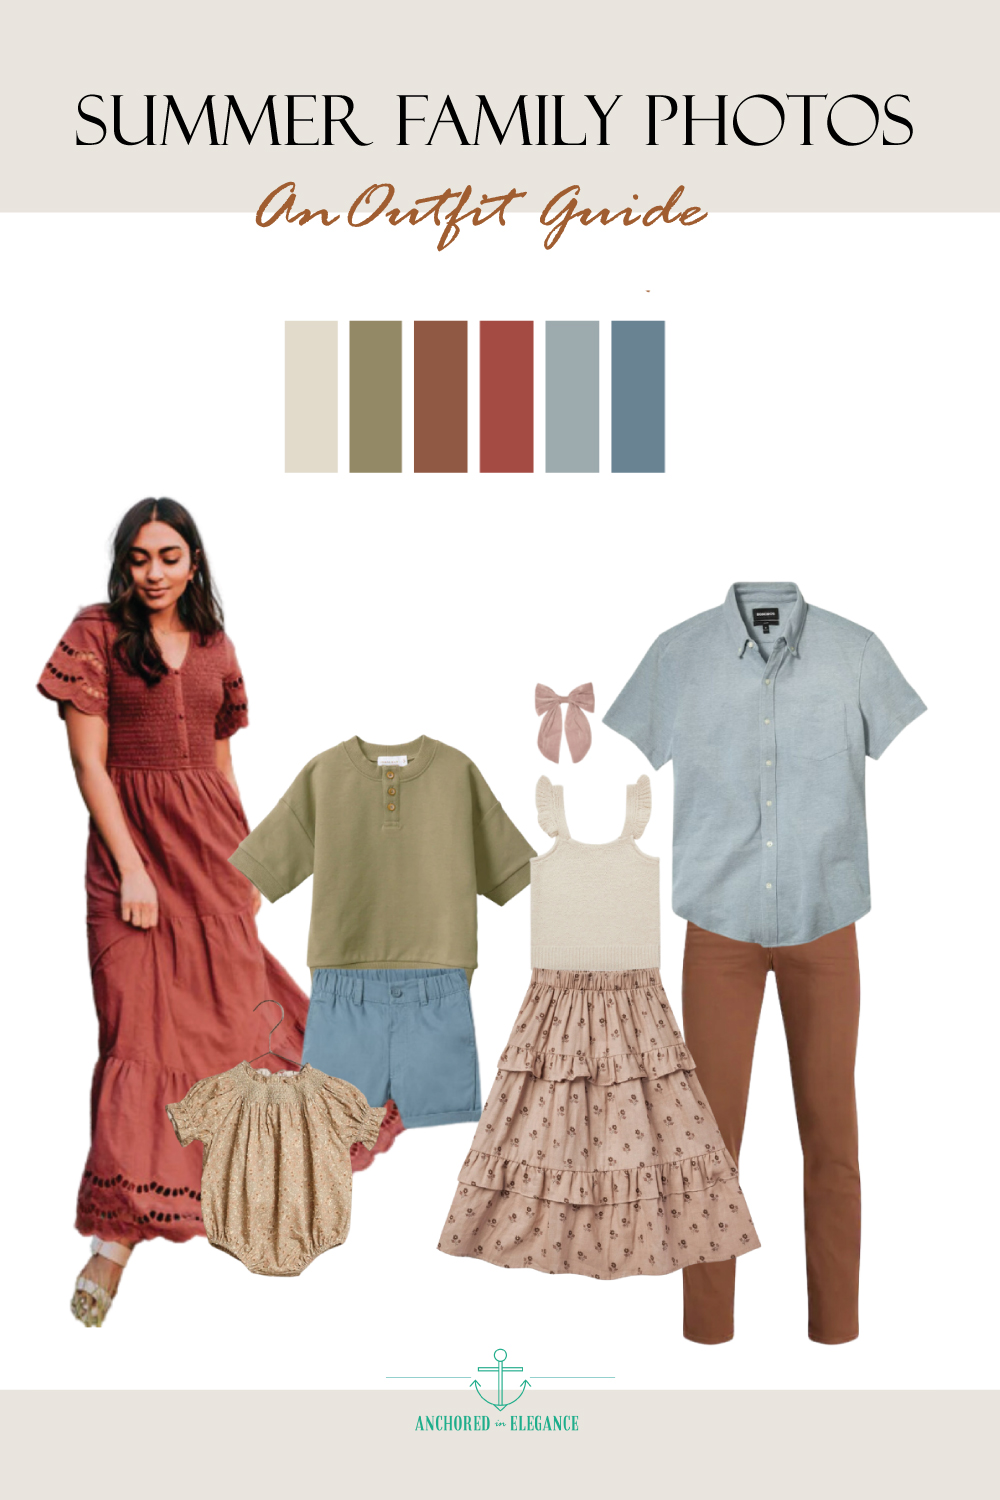 Family Portrait Resources: What to Wear (and Not Wear) for Family